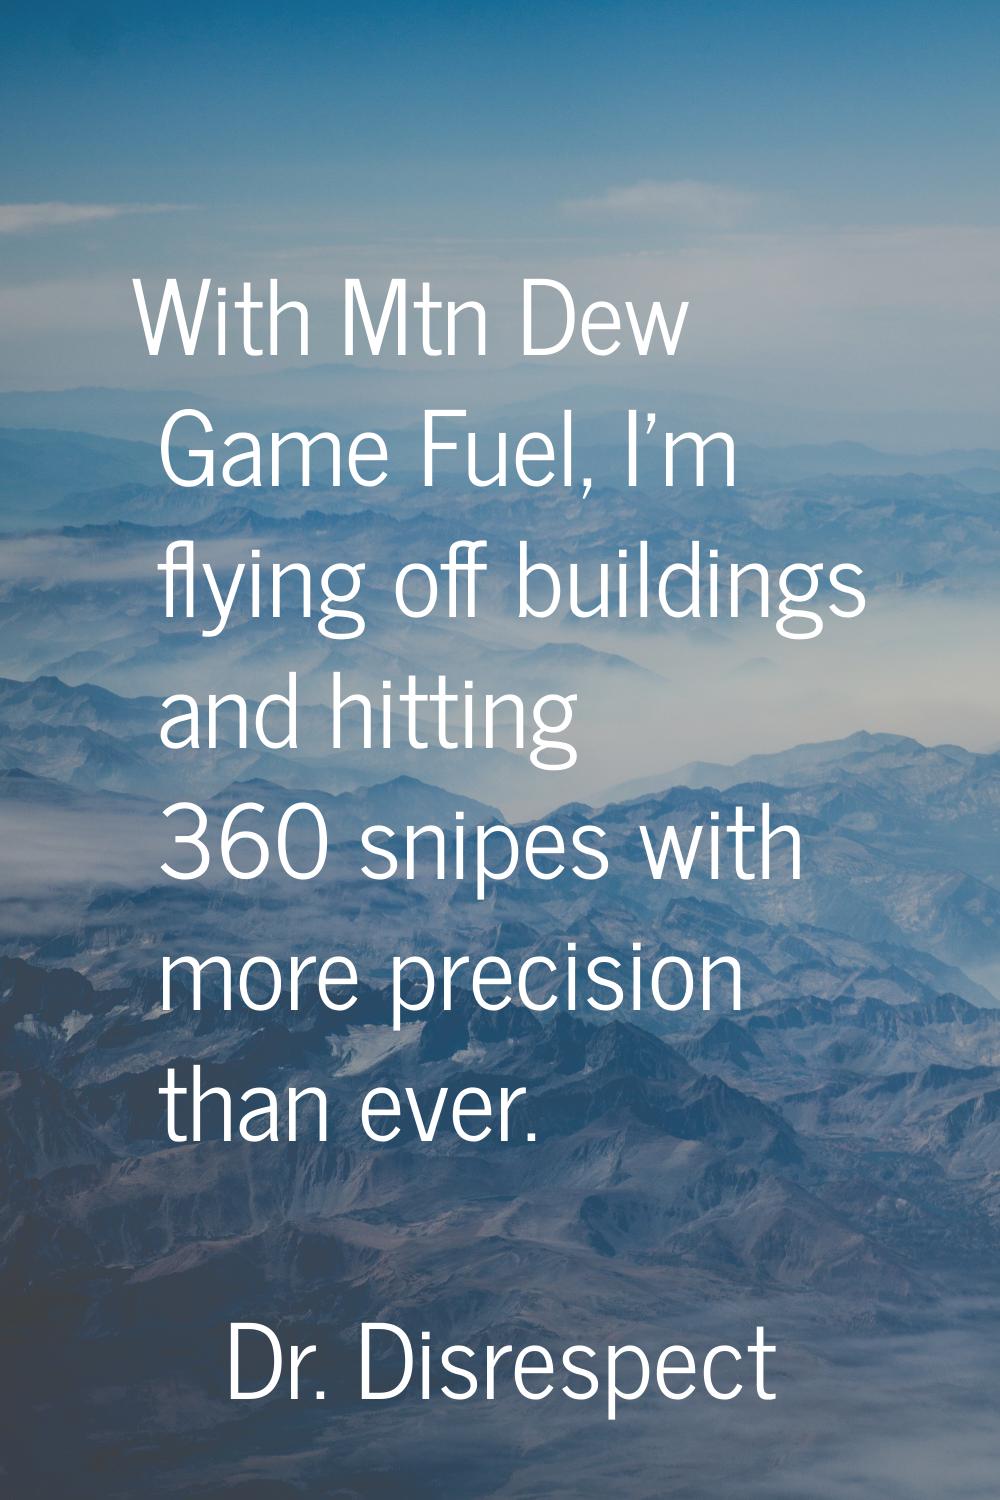 With Mtn Dew Game Fuel, I'm flying off buildings and hitting 360 snipes with more precision than ev